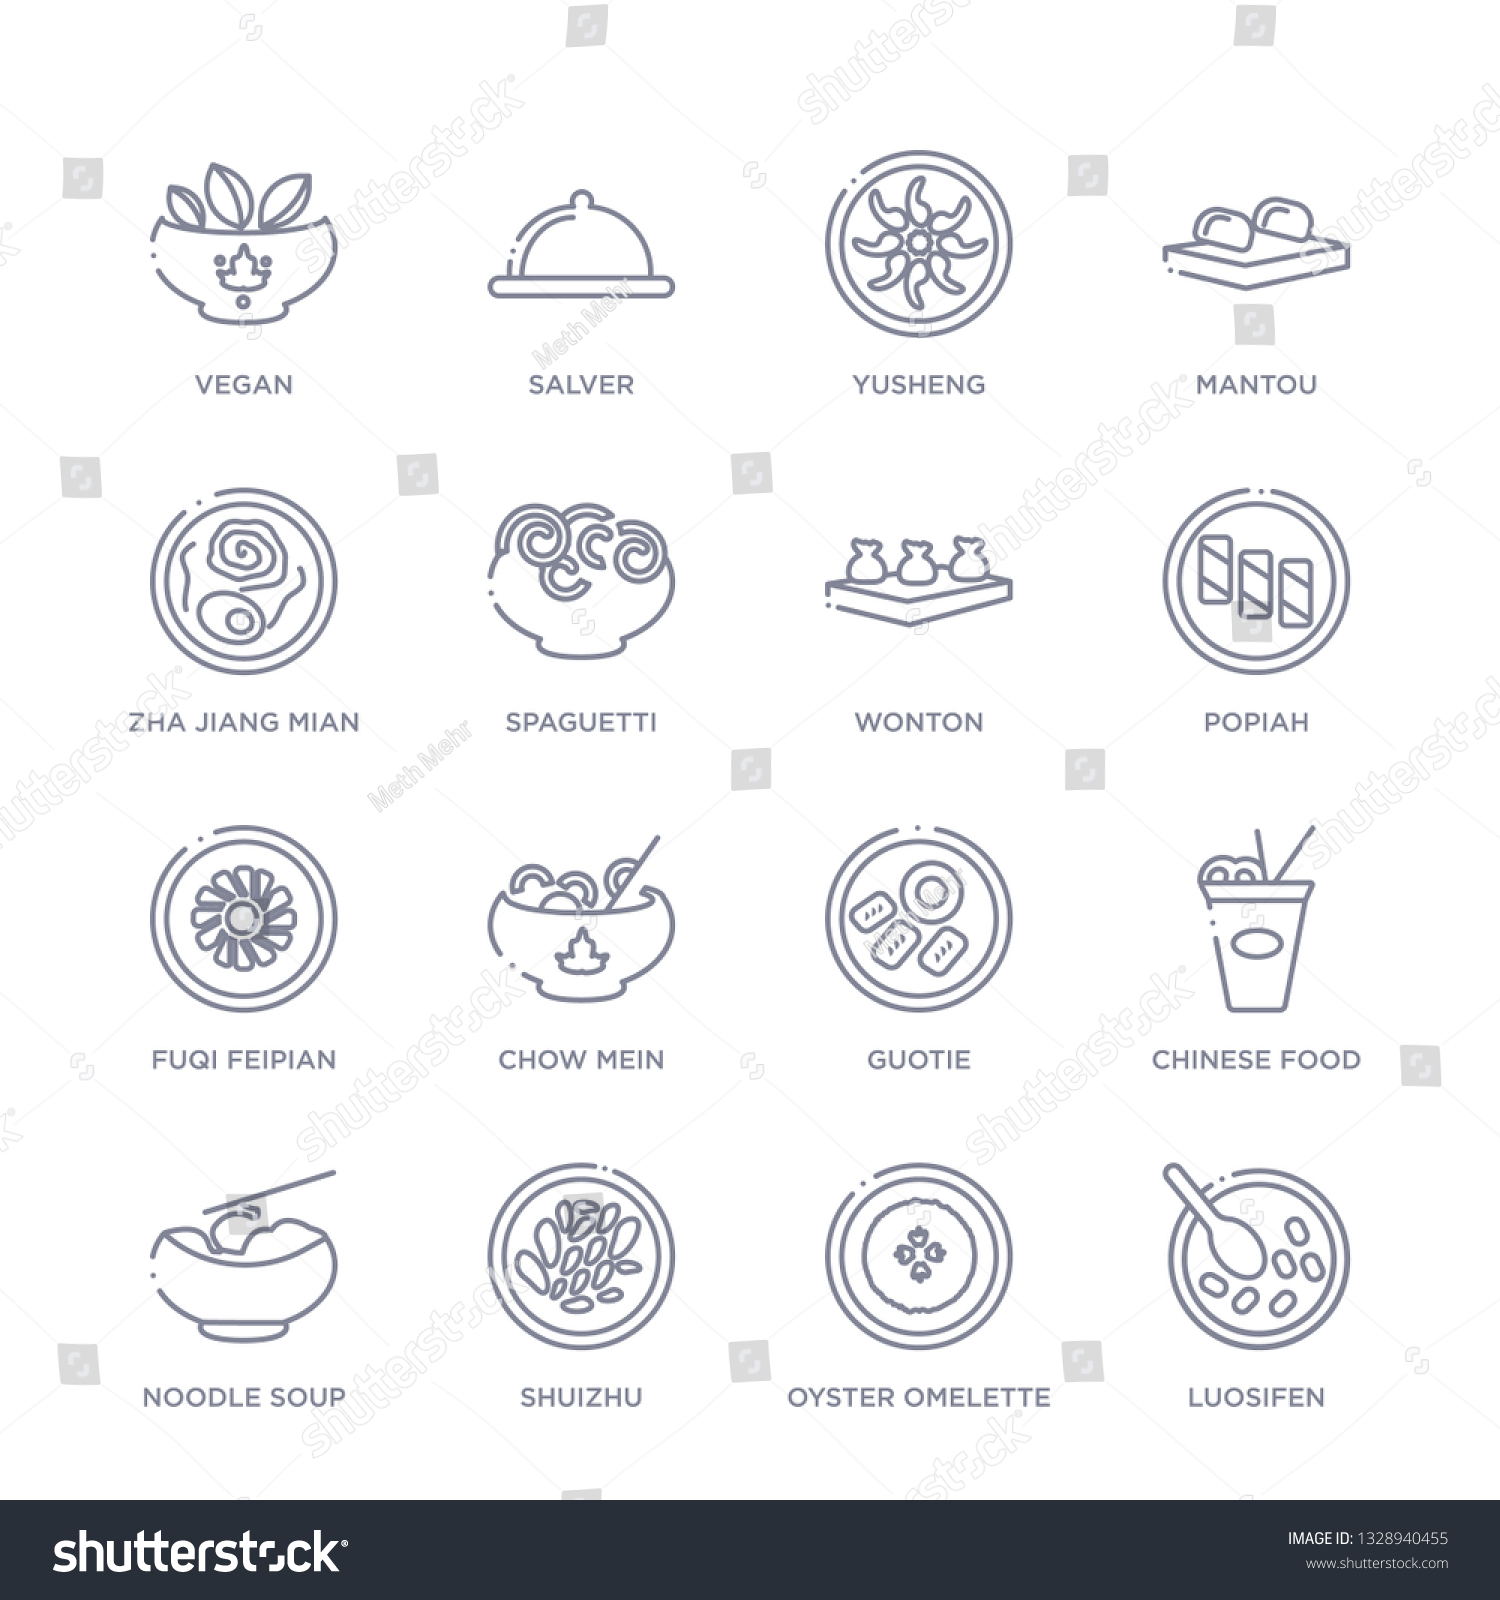 SVG of set of 16 thin linear icons such as luosifen, oyster omelette, shuizhu, noodle soup, chinese food, guotie, chow mein from food collection on white background, outline sign icons or symbols svg